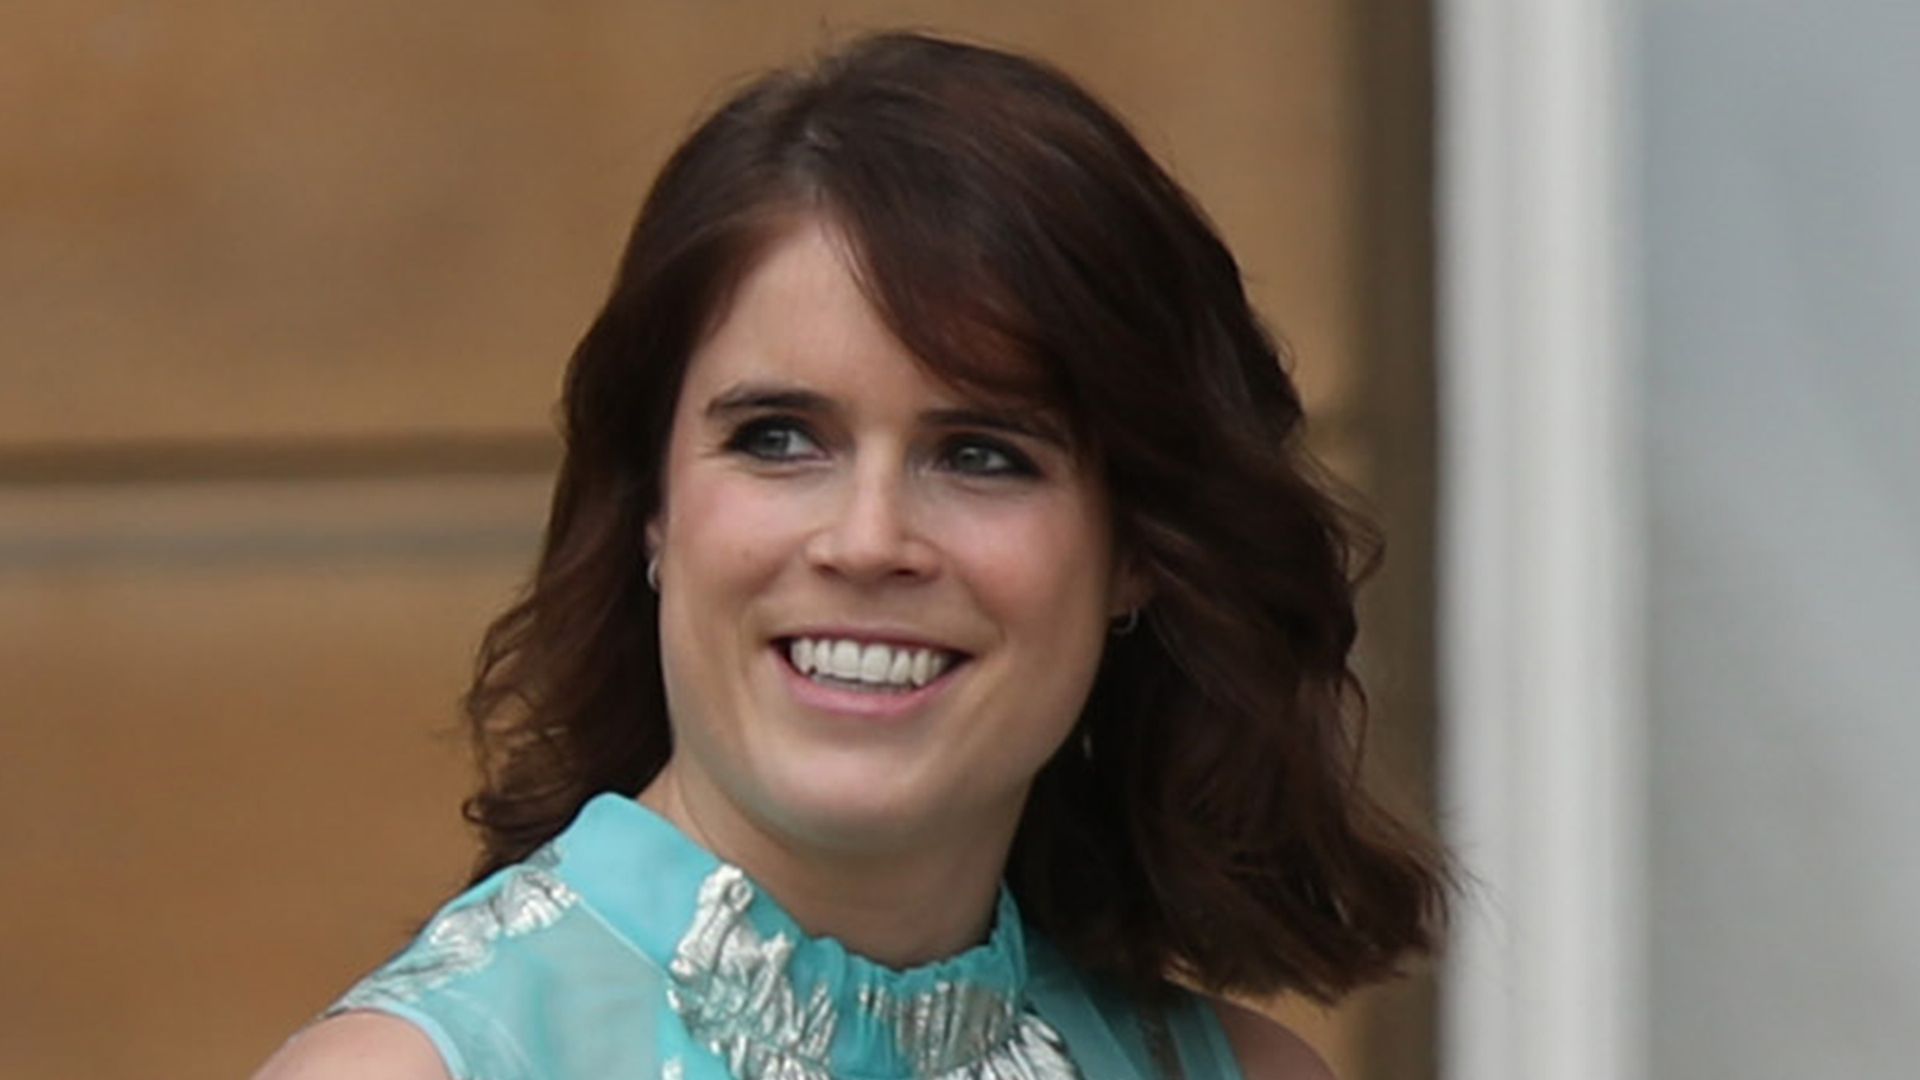 Princess Eugenie glams up in a coat that looks mighty like Meghan Markle's